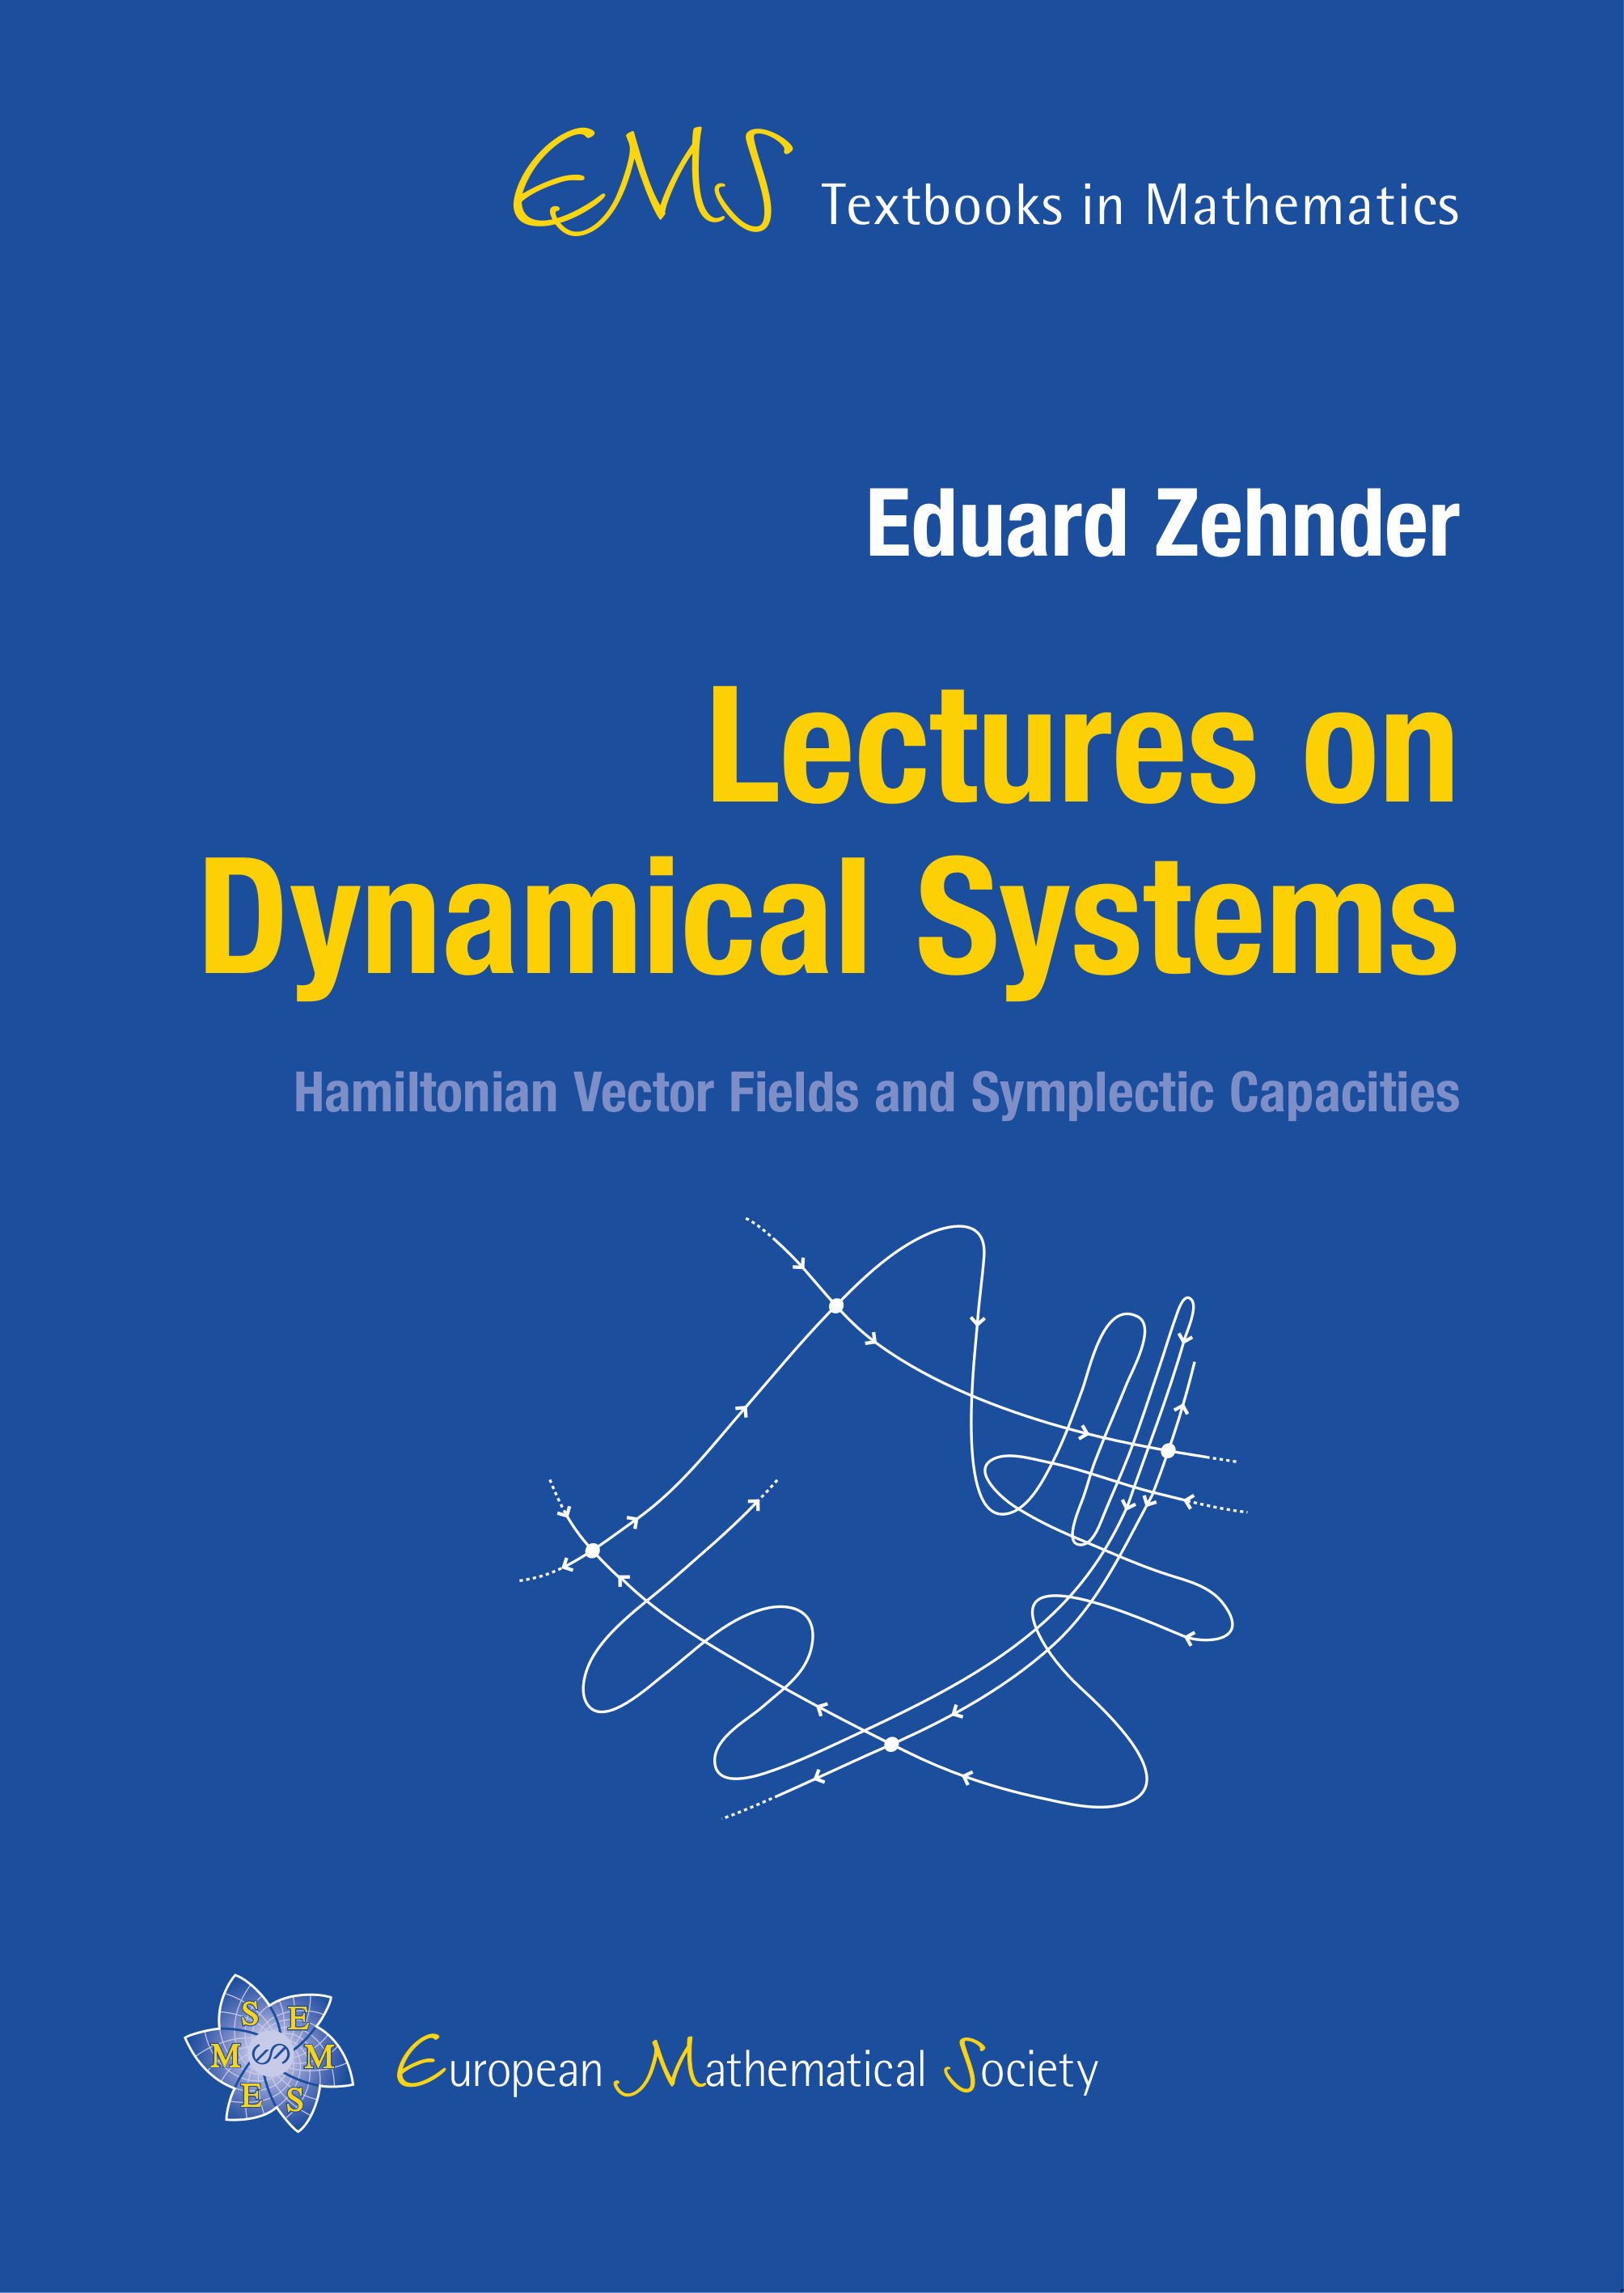 Hamiltonian vector fields and symplectic diffeomorphisms cover